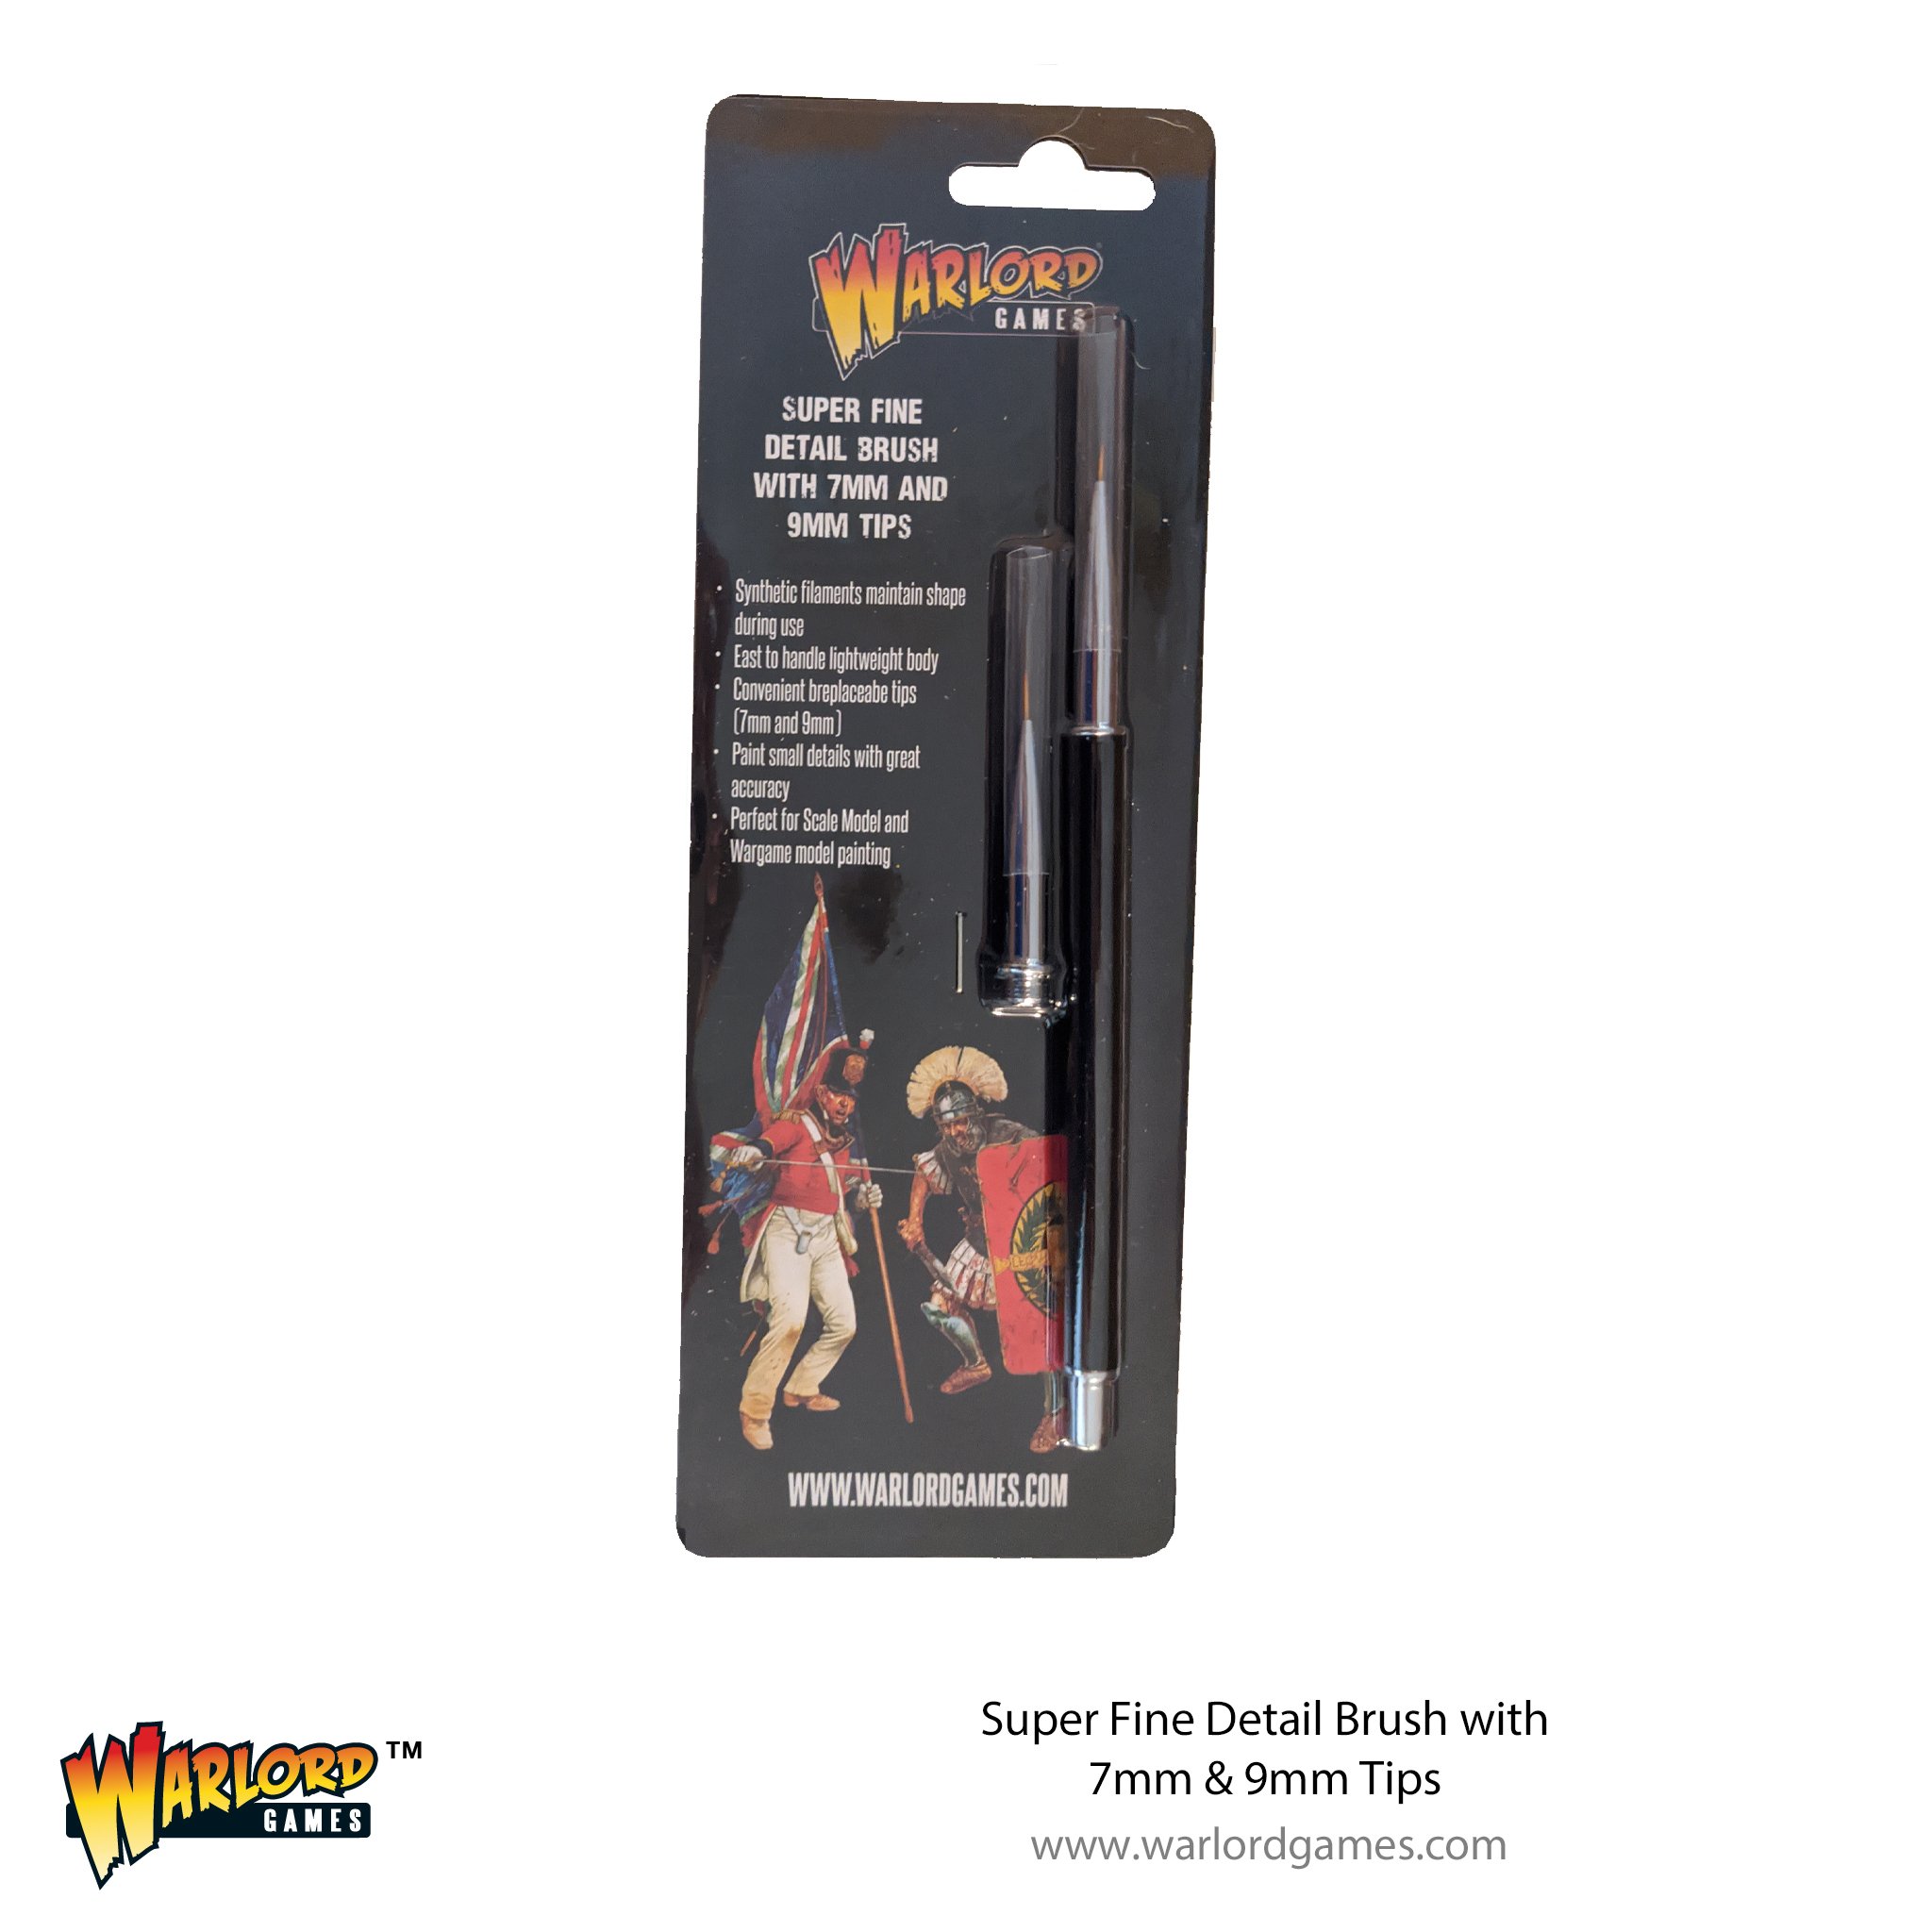 Warlord Games: Super Fine Detail Brush with 7mm & 9mm Tips 